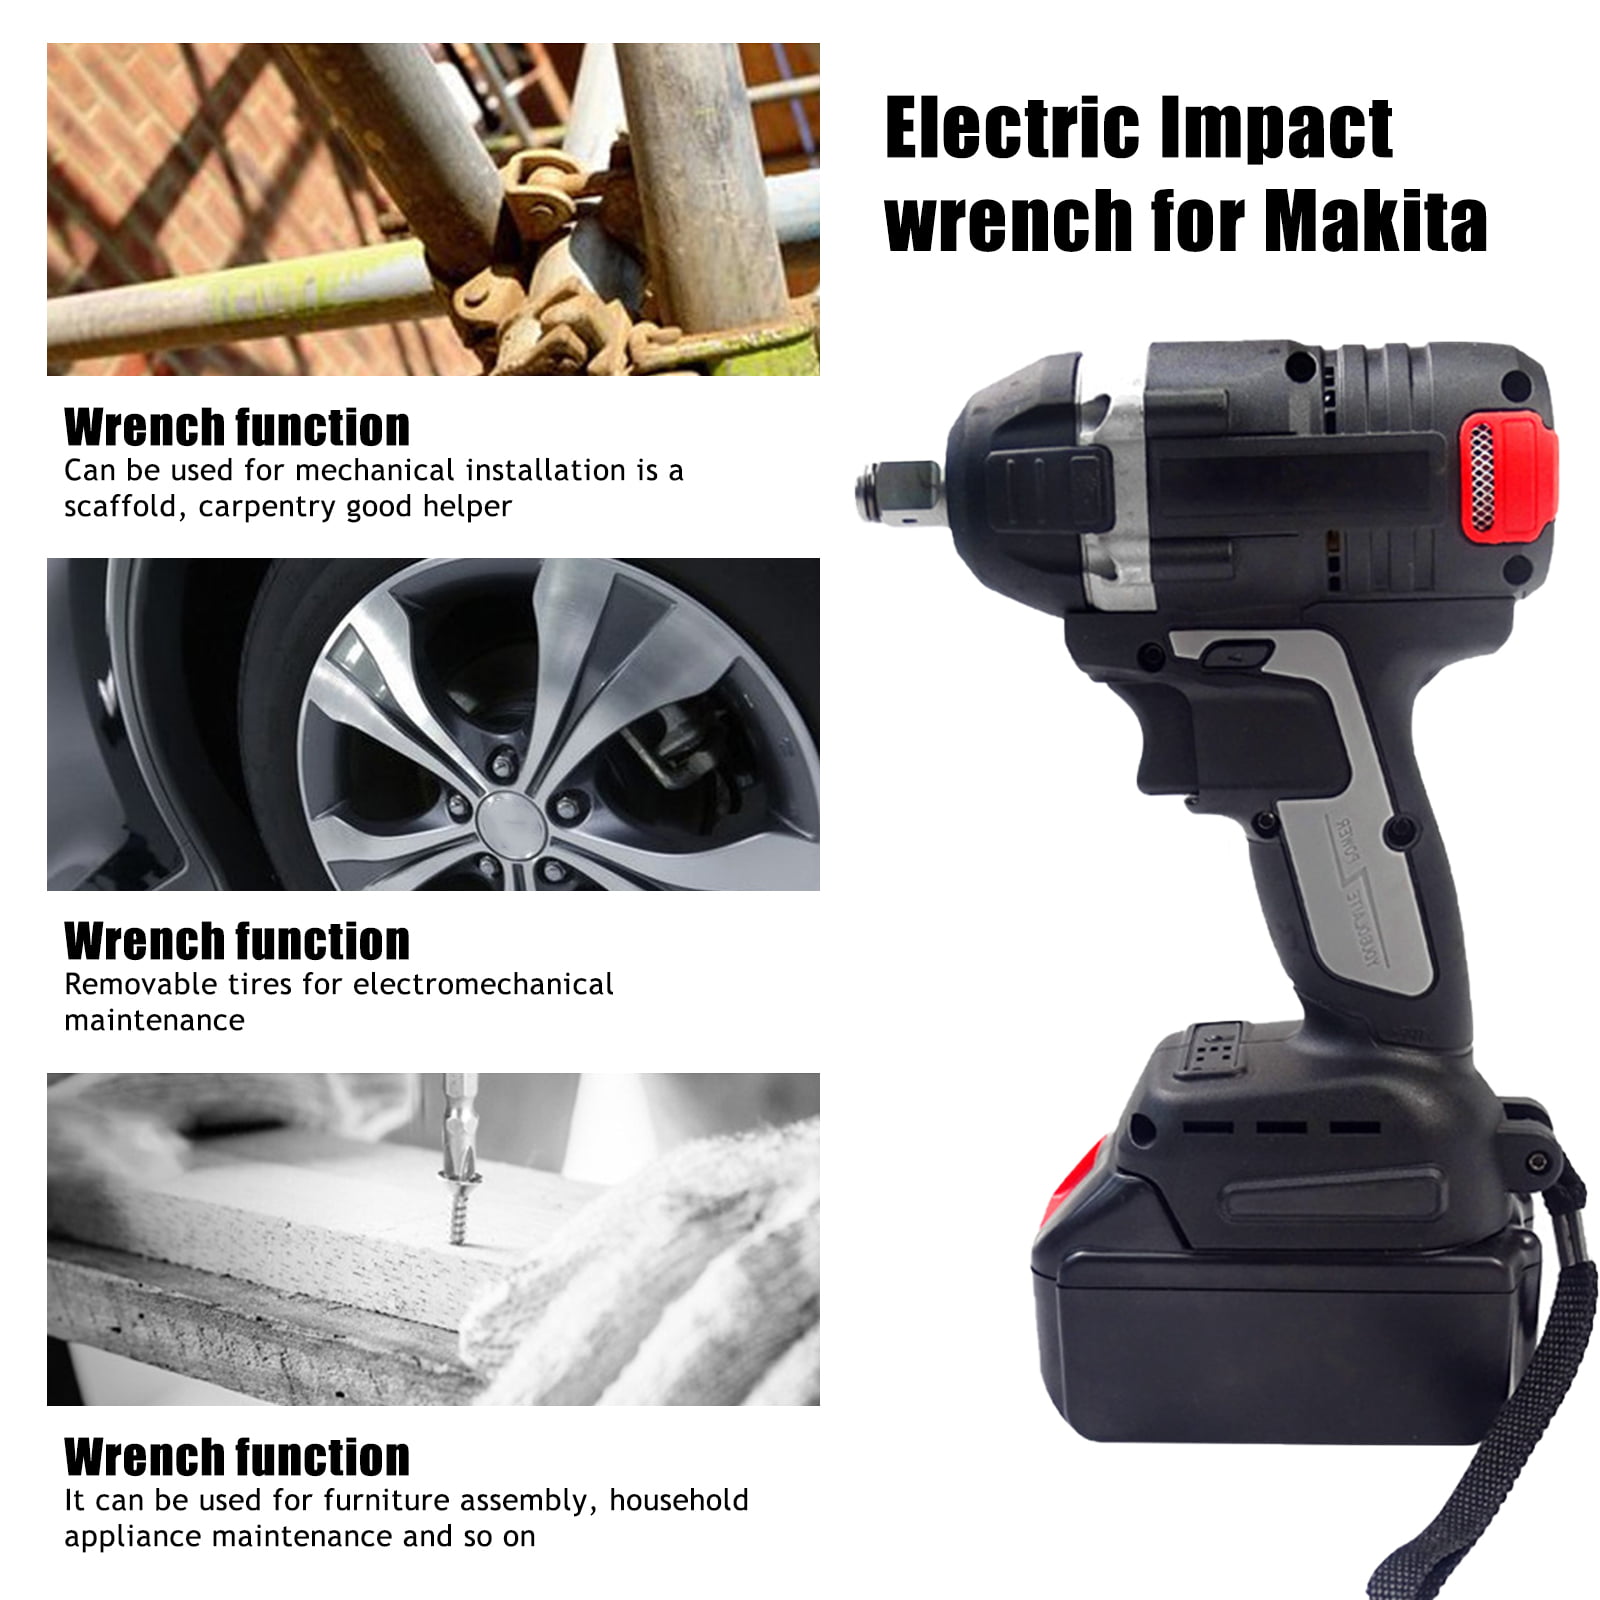 Details about   1/2" 21V 460NM Rechargeable Torque Impact Wrench Cordless Replacement 2 Li-Ion 